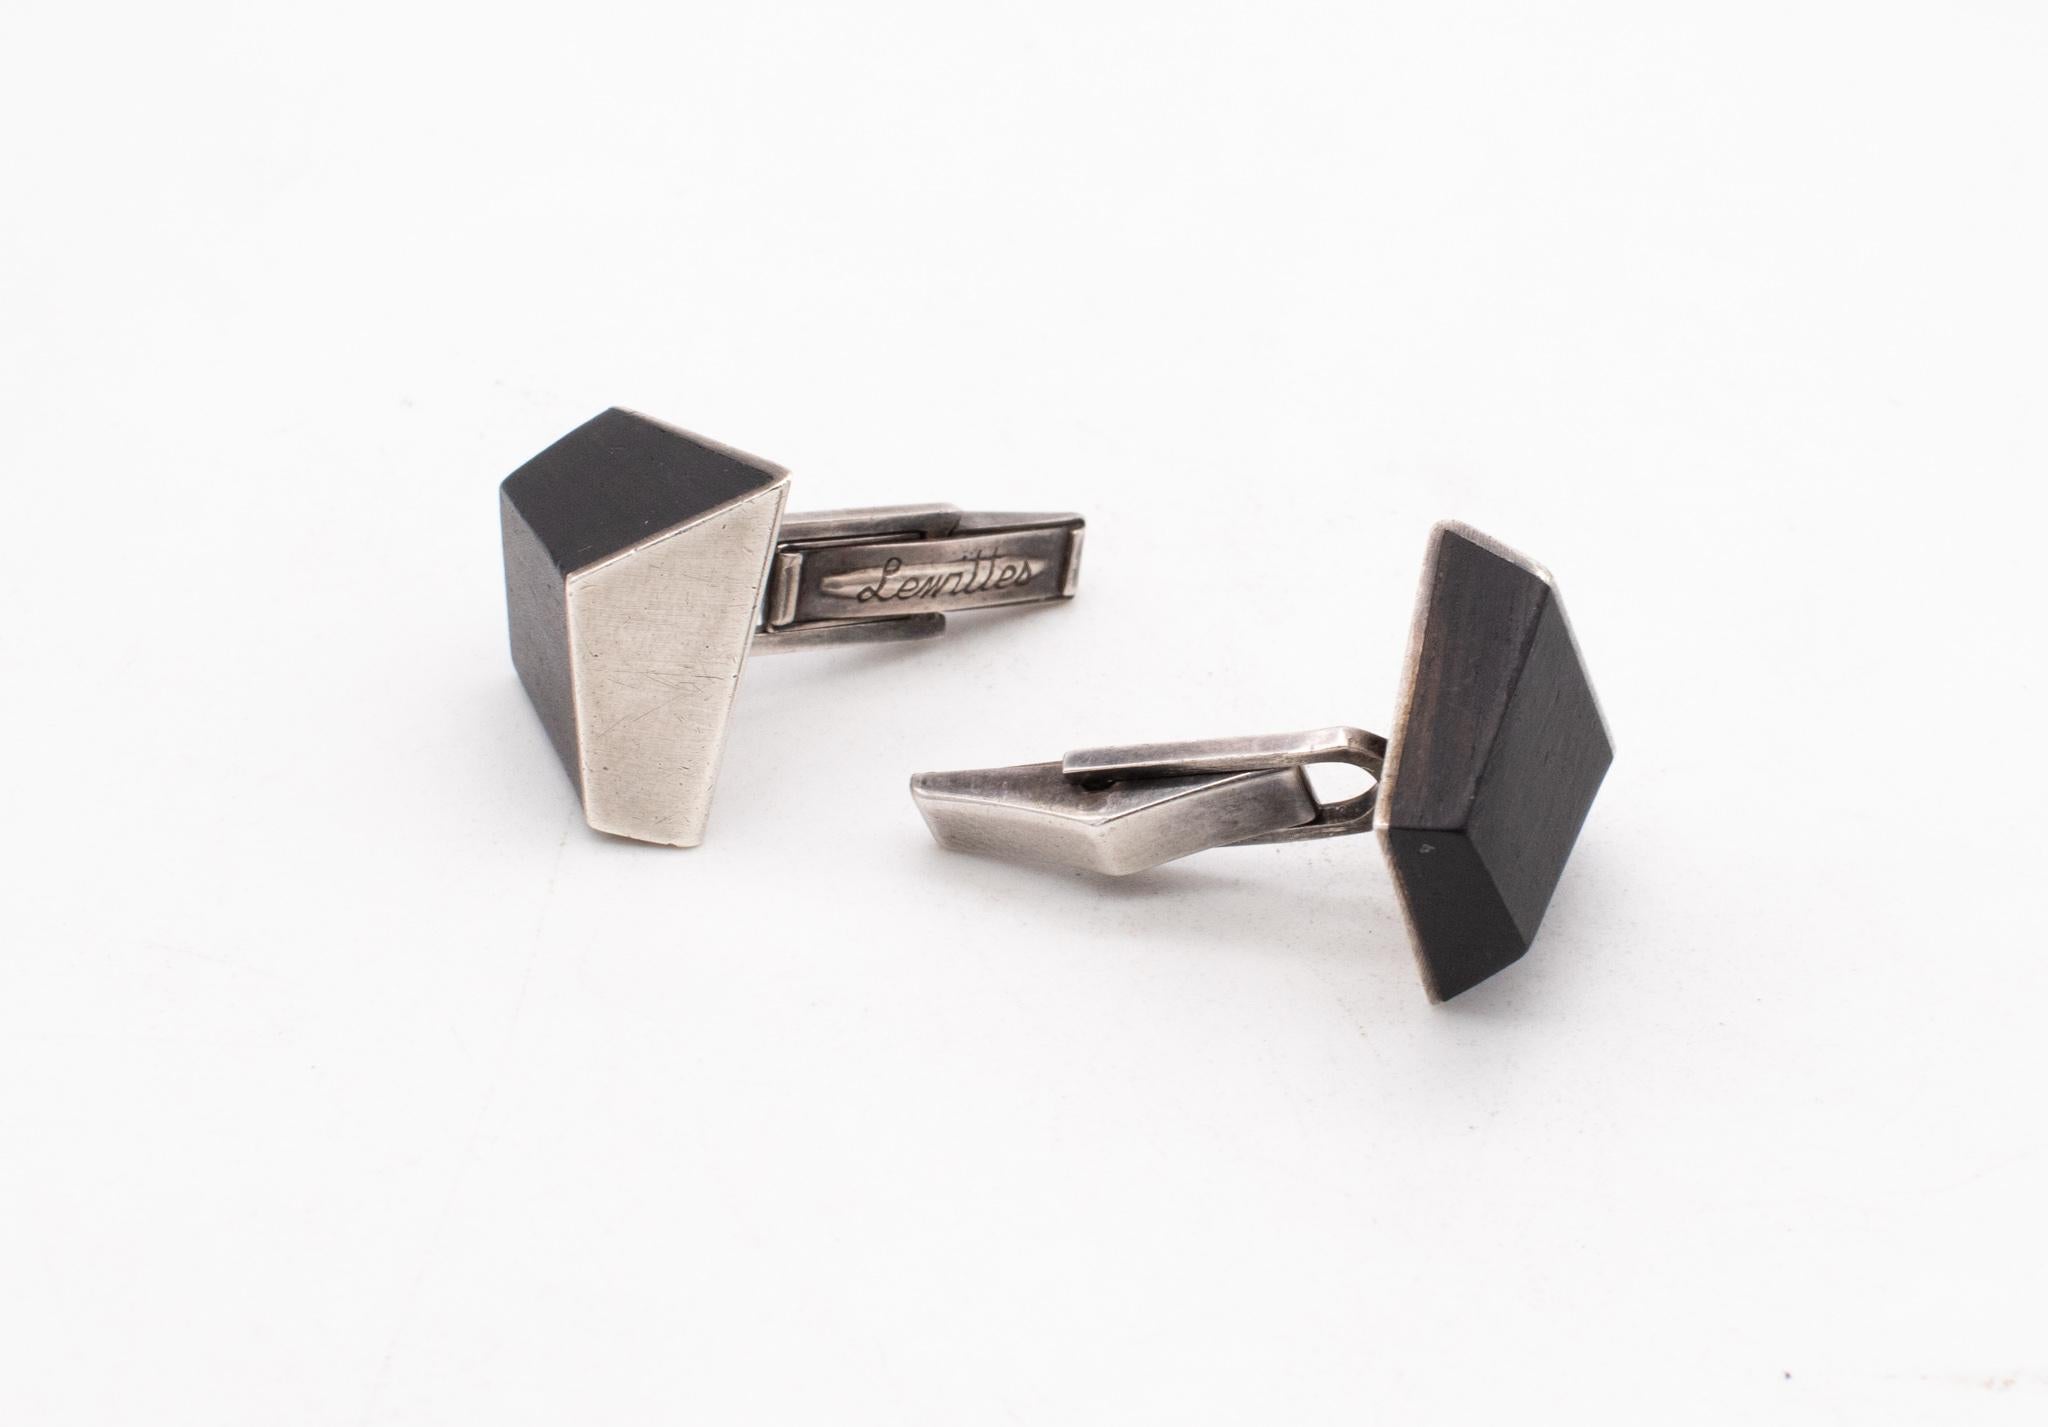 Esther Lewittes Modernist 1950 Geometric Cufflinks sterling Silver & Ebony Wood In Excellent Condition For Sale In Miami, FL